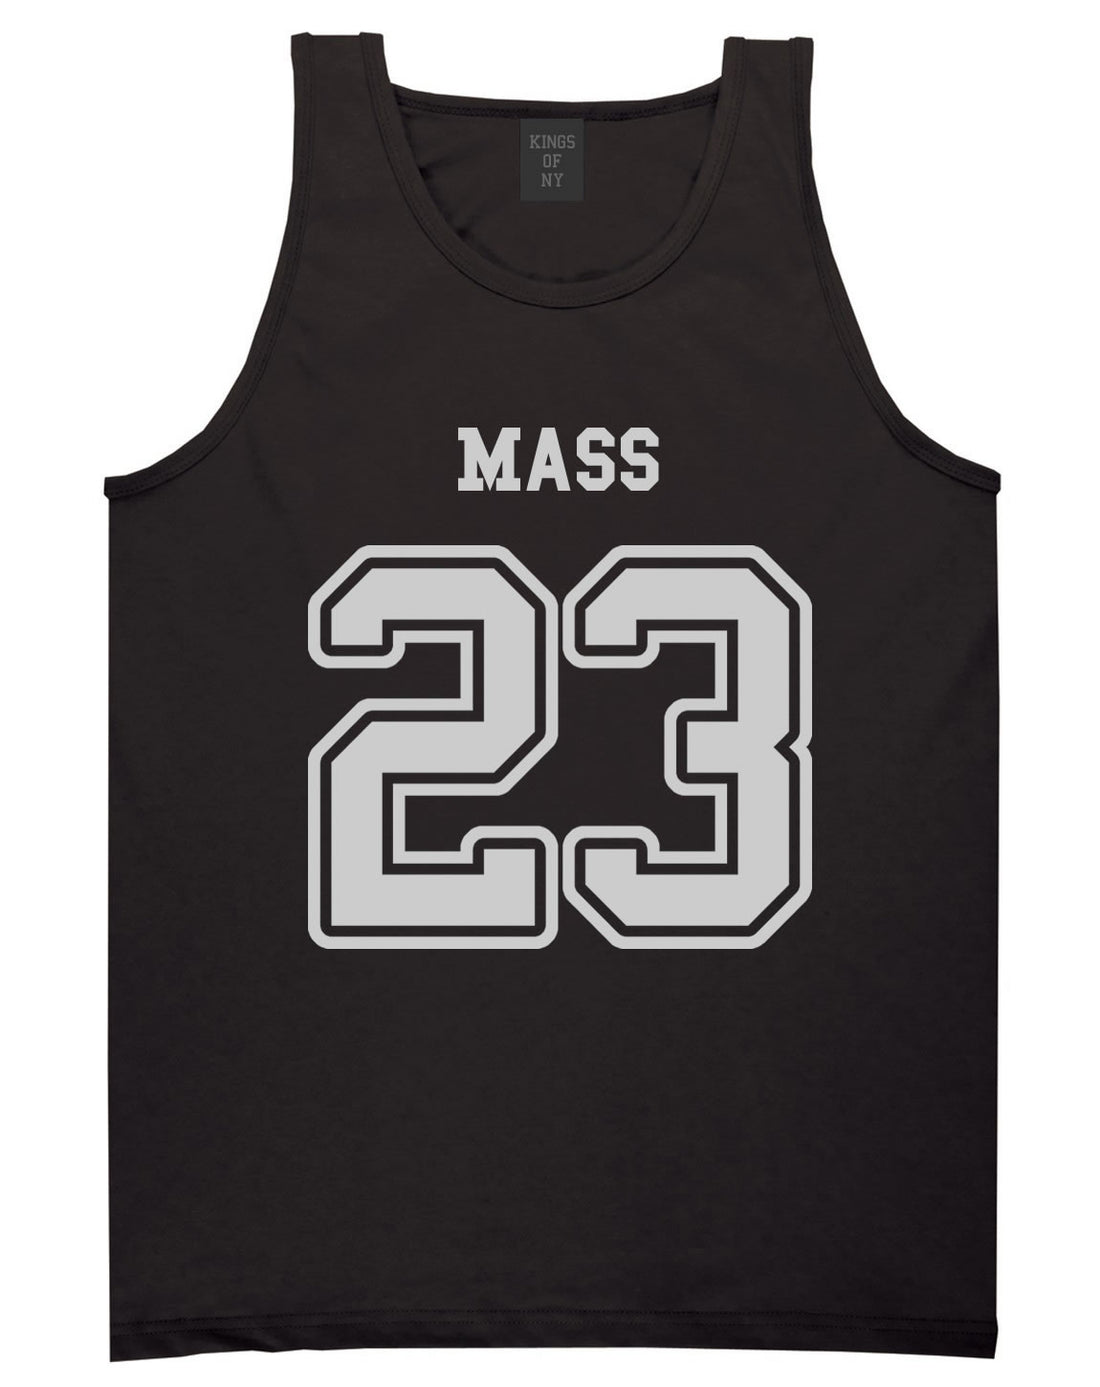 Sport Style Massachusetts 23 Team State Jersey Mens Tank Top By Kings Of NY